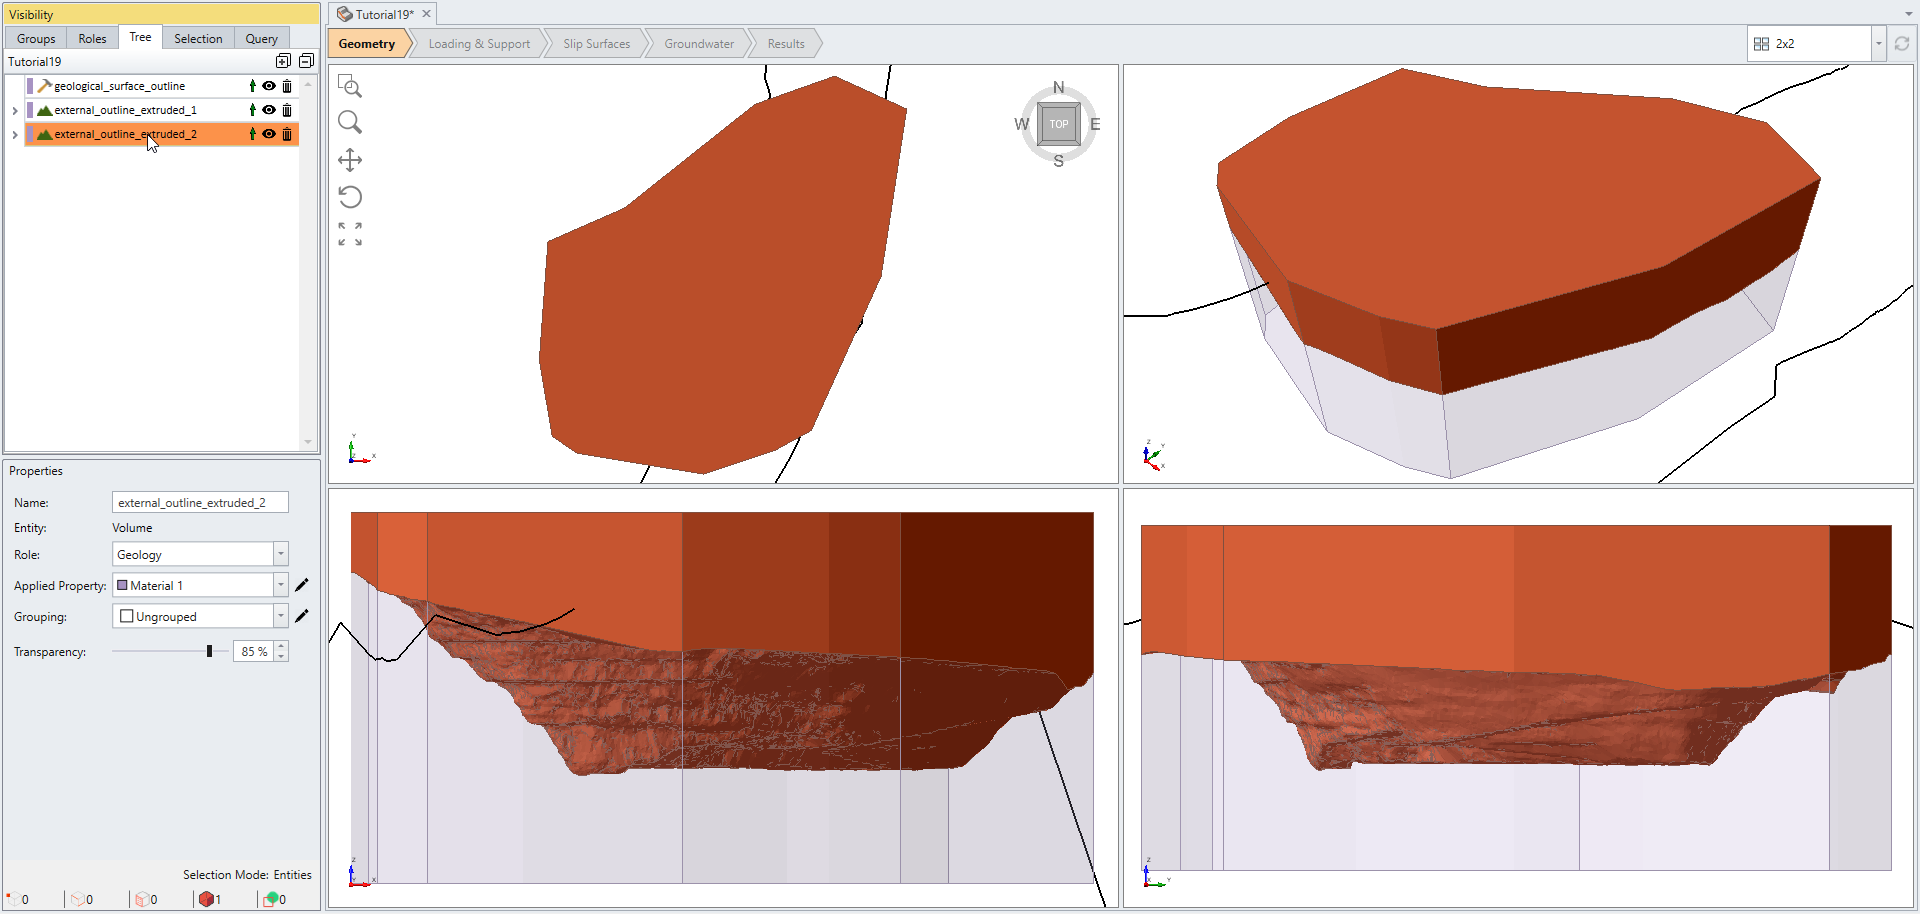 Top Layer of Open Pit model